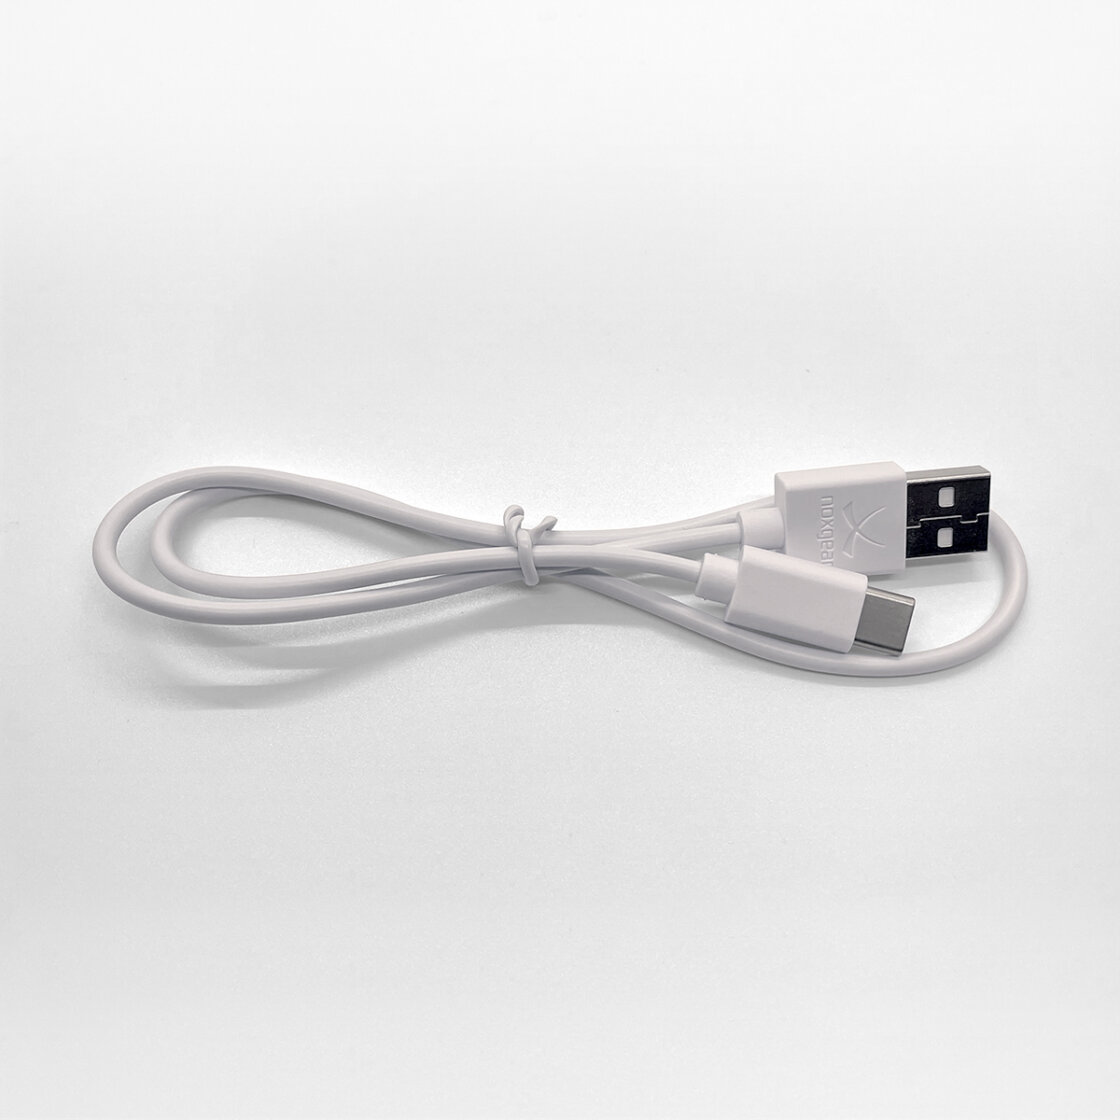 Tracer2 Charge Cable 2